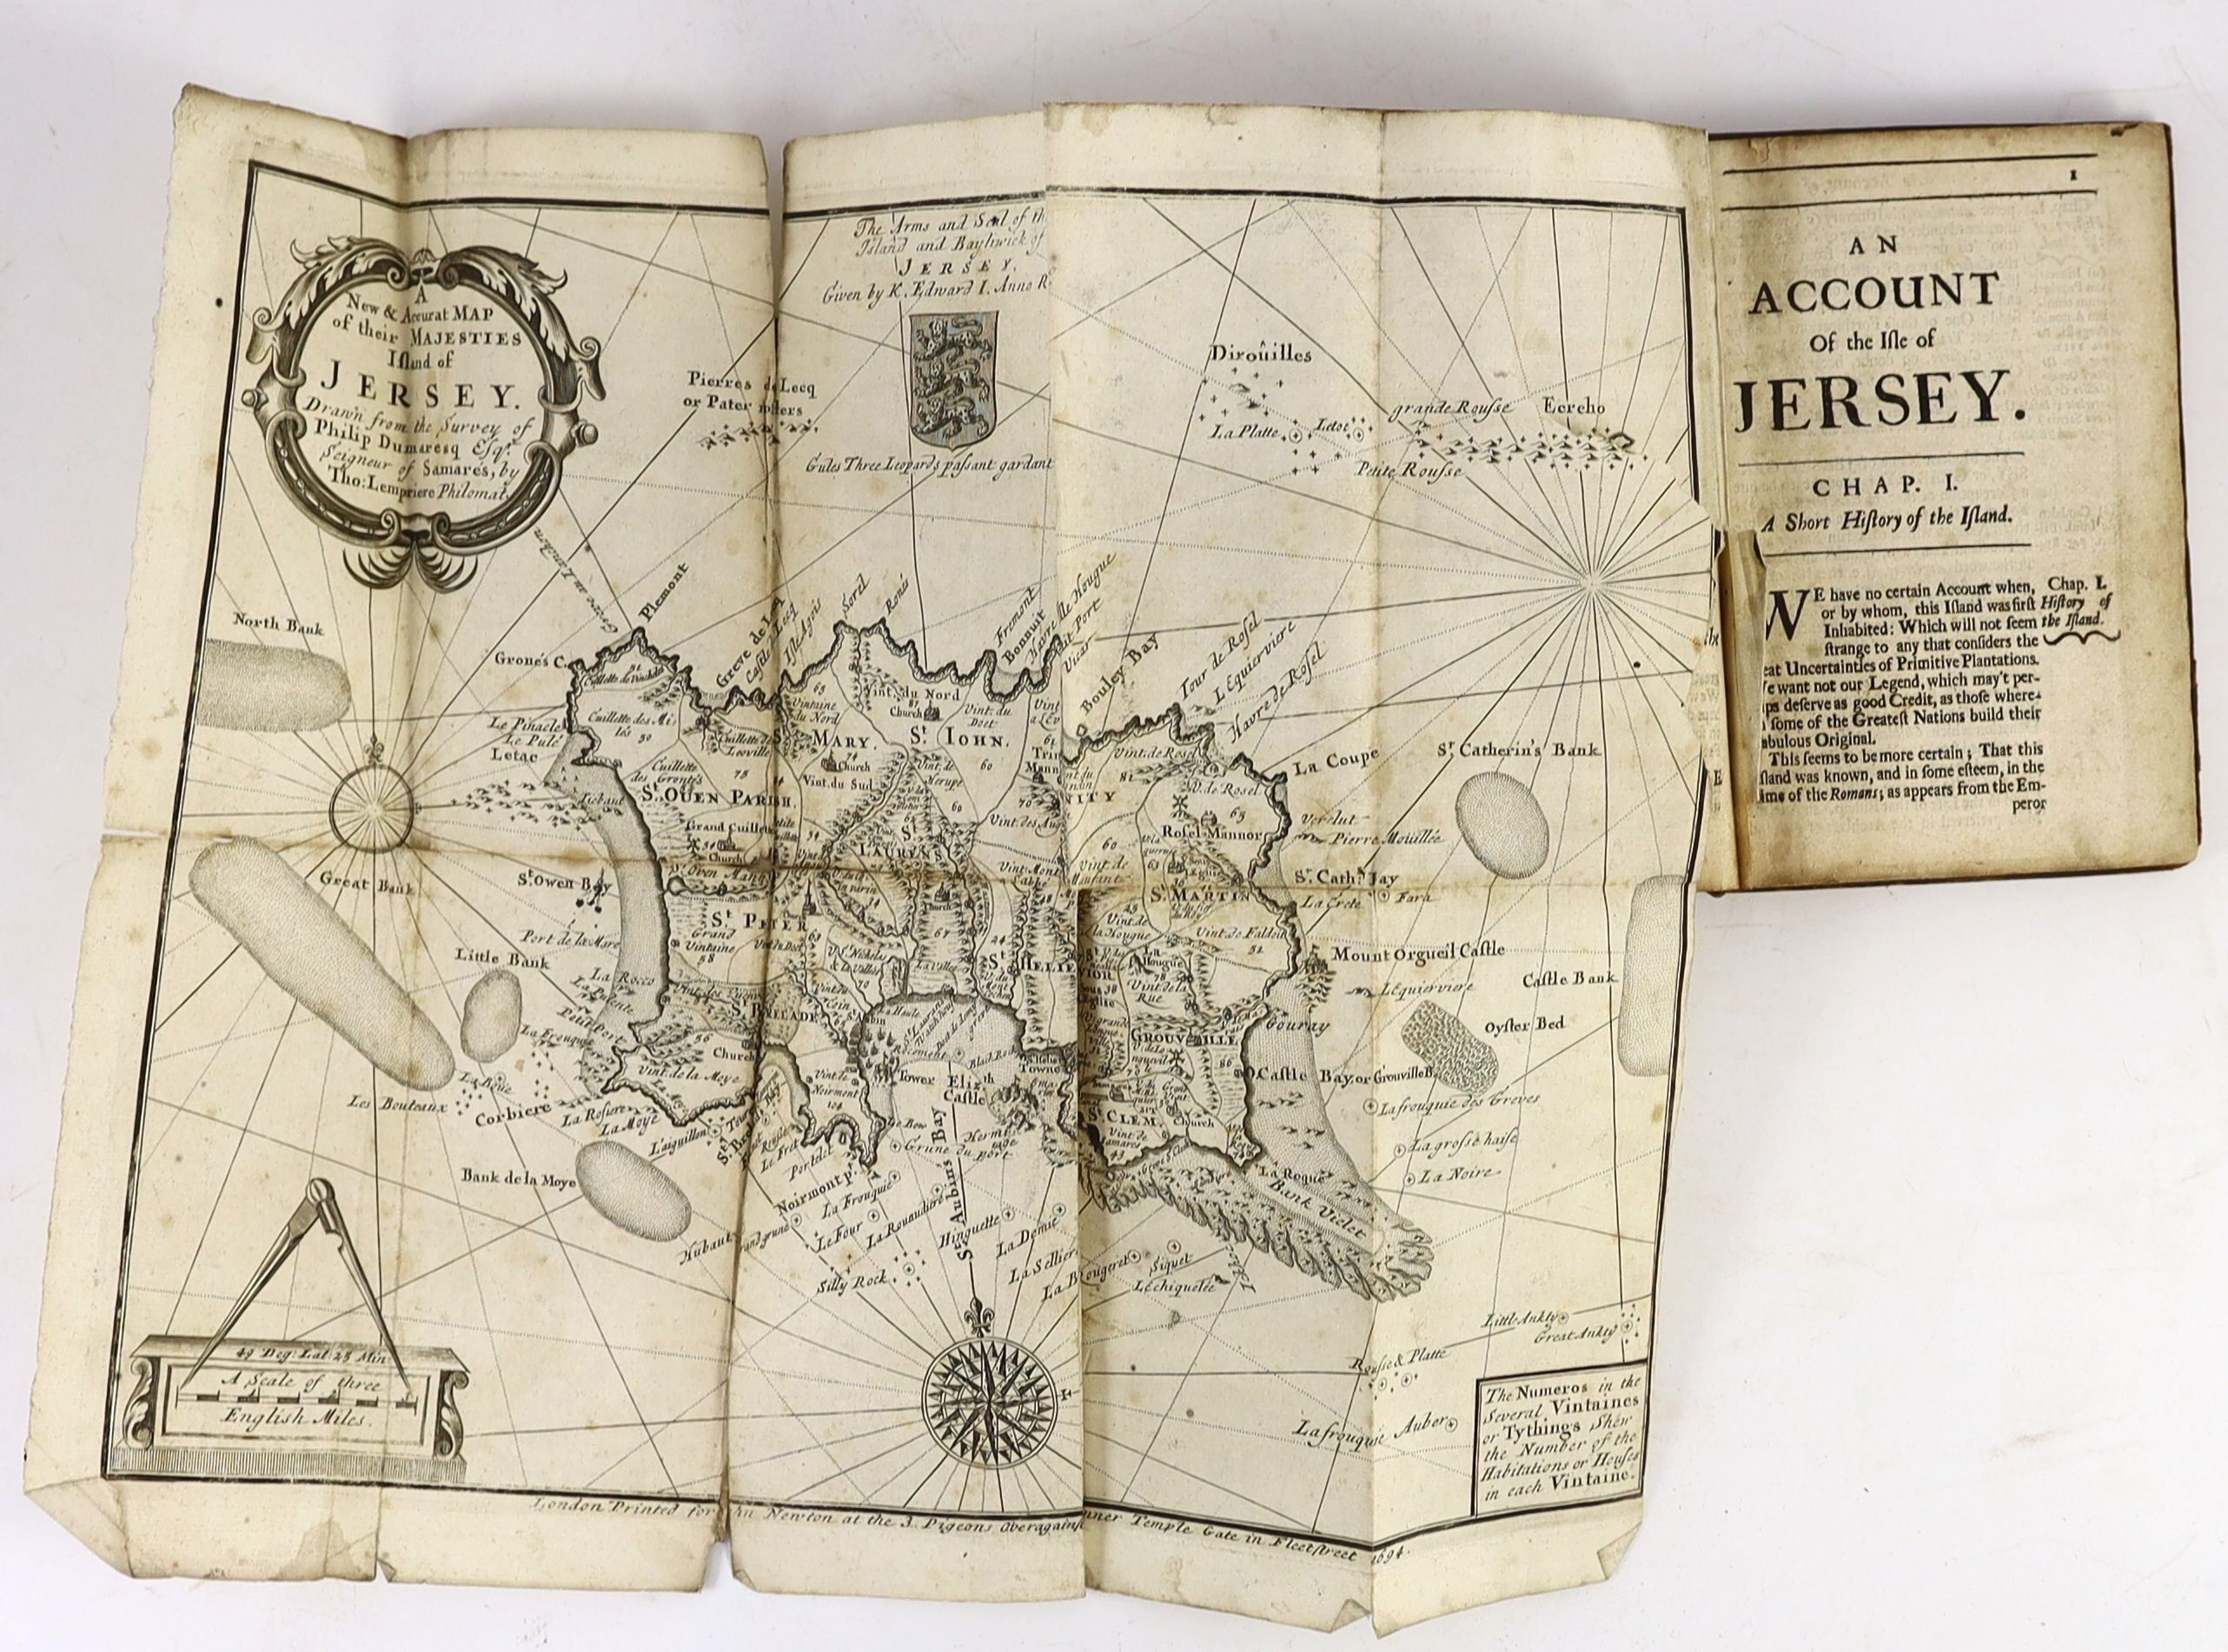 Falle, Philip - An Account of the Isle of Jersey, 8vo, calf, with folding map, John Newton, London, 1694